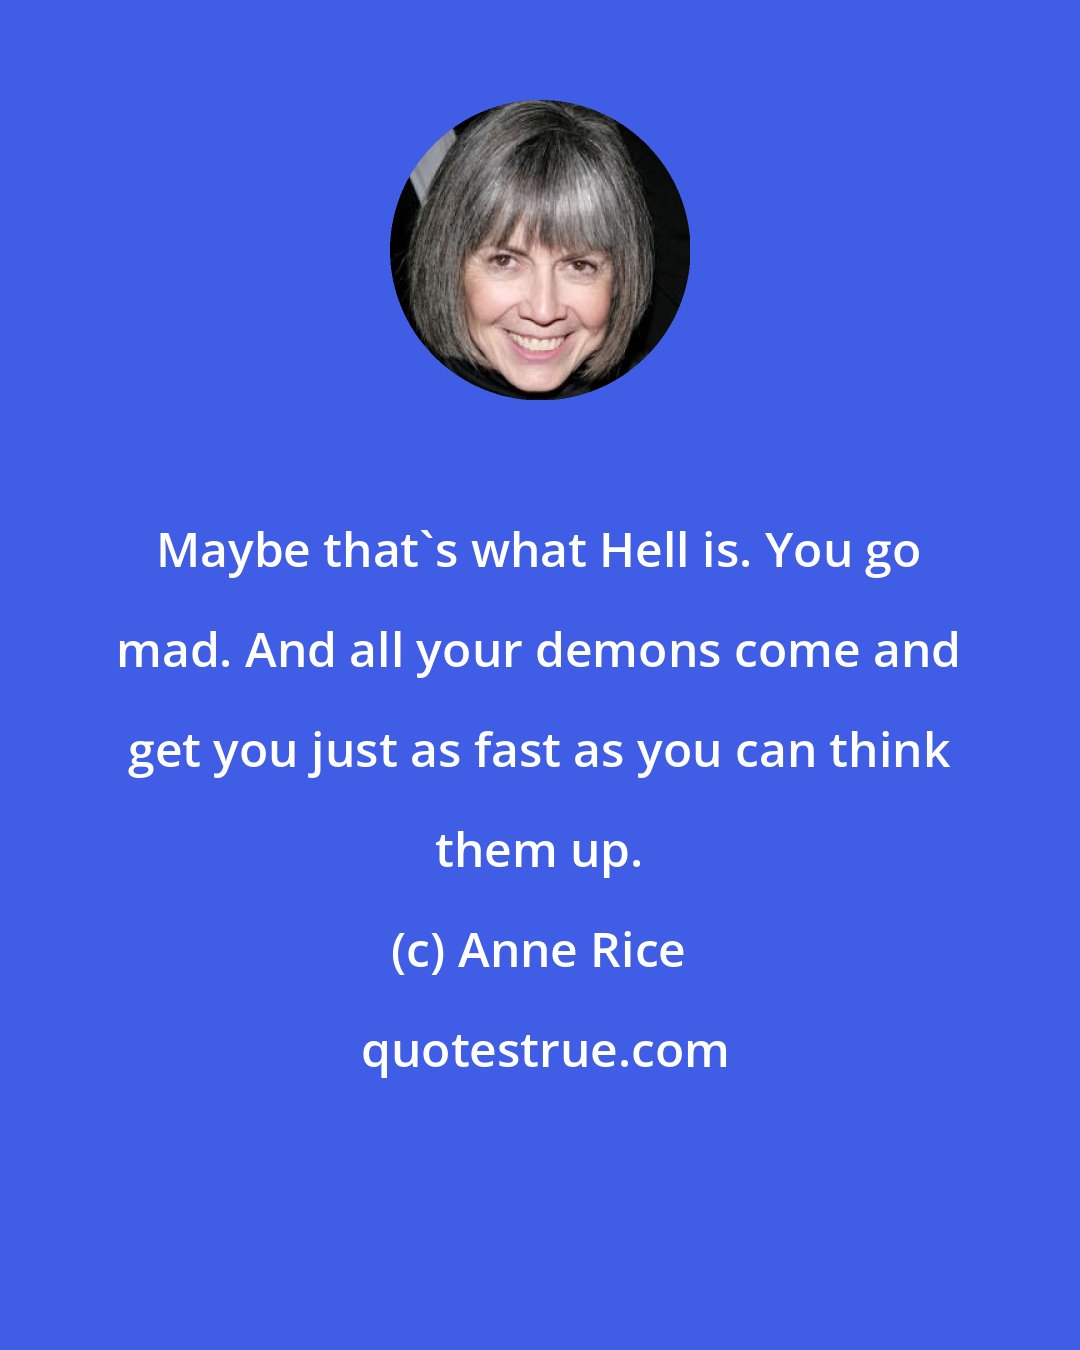 Anne Rice: Maybe that's what Hell is. You go mad. And all your demons come and get you just as fast as you can think them up.